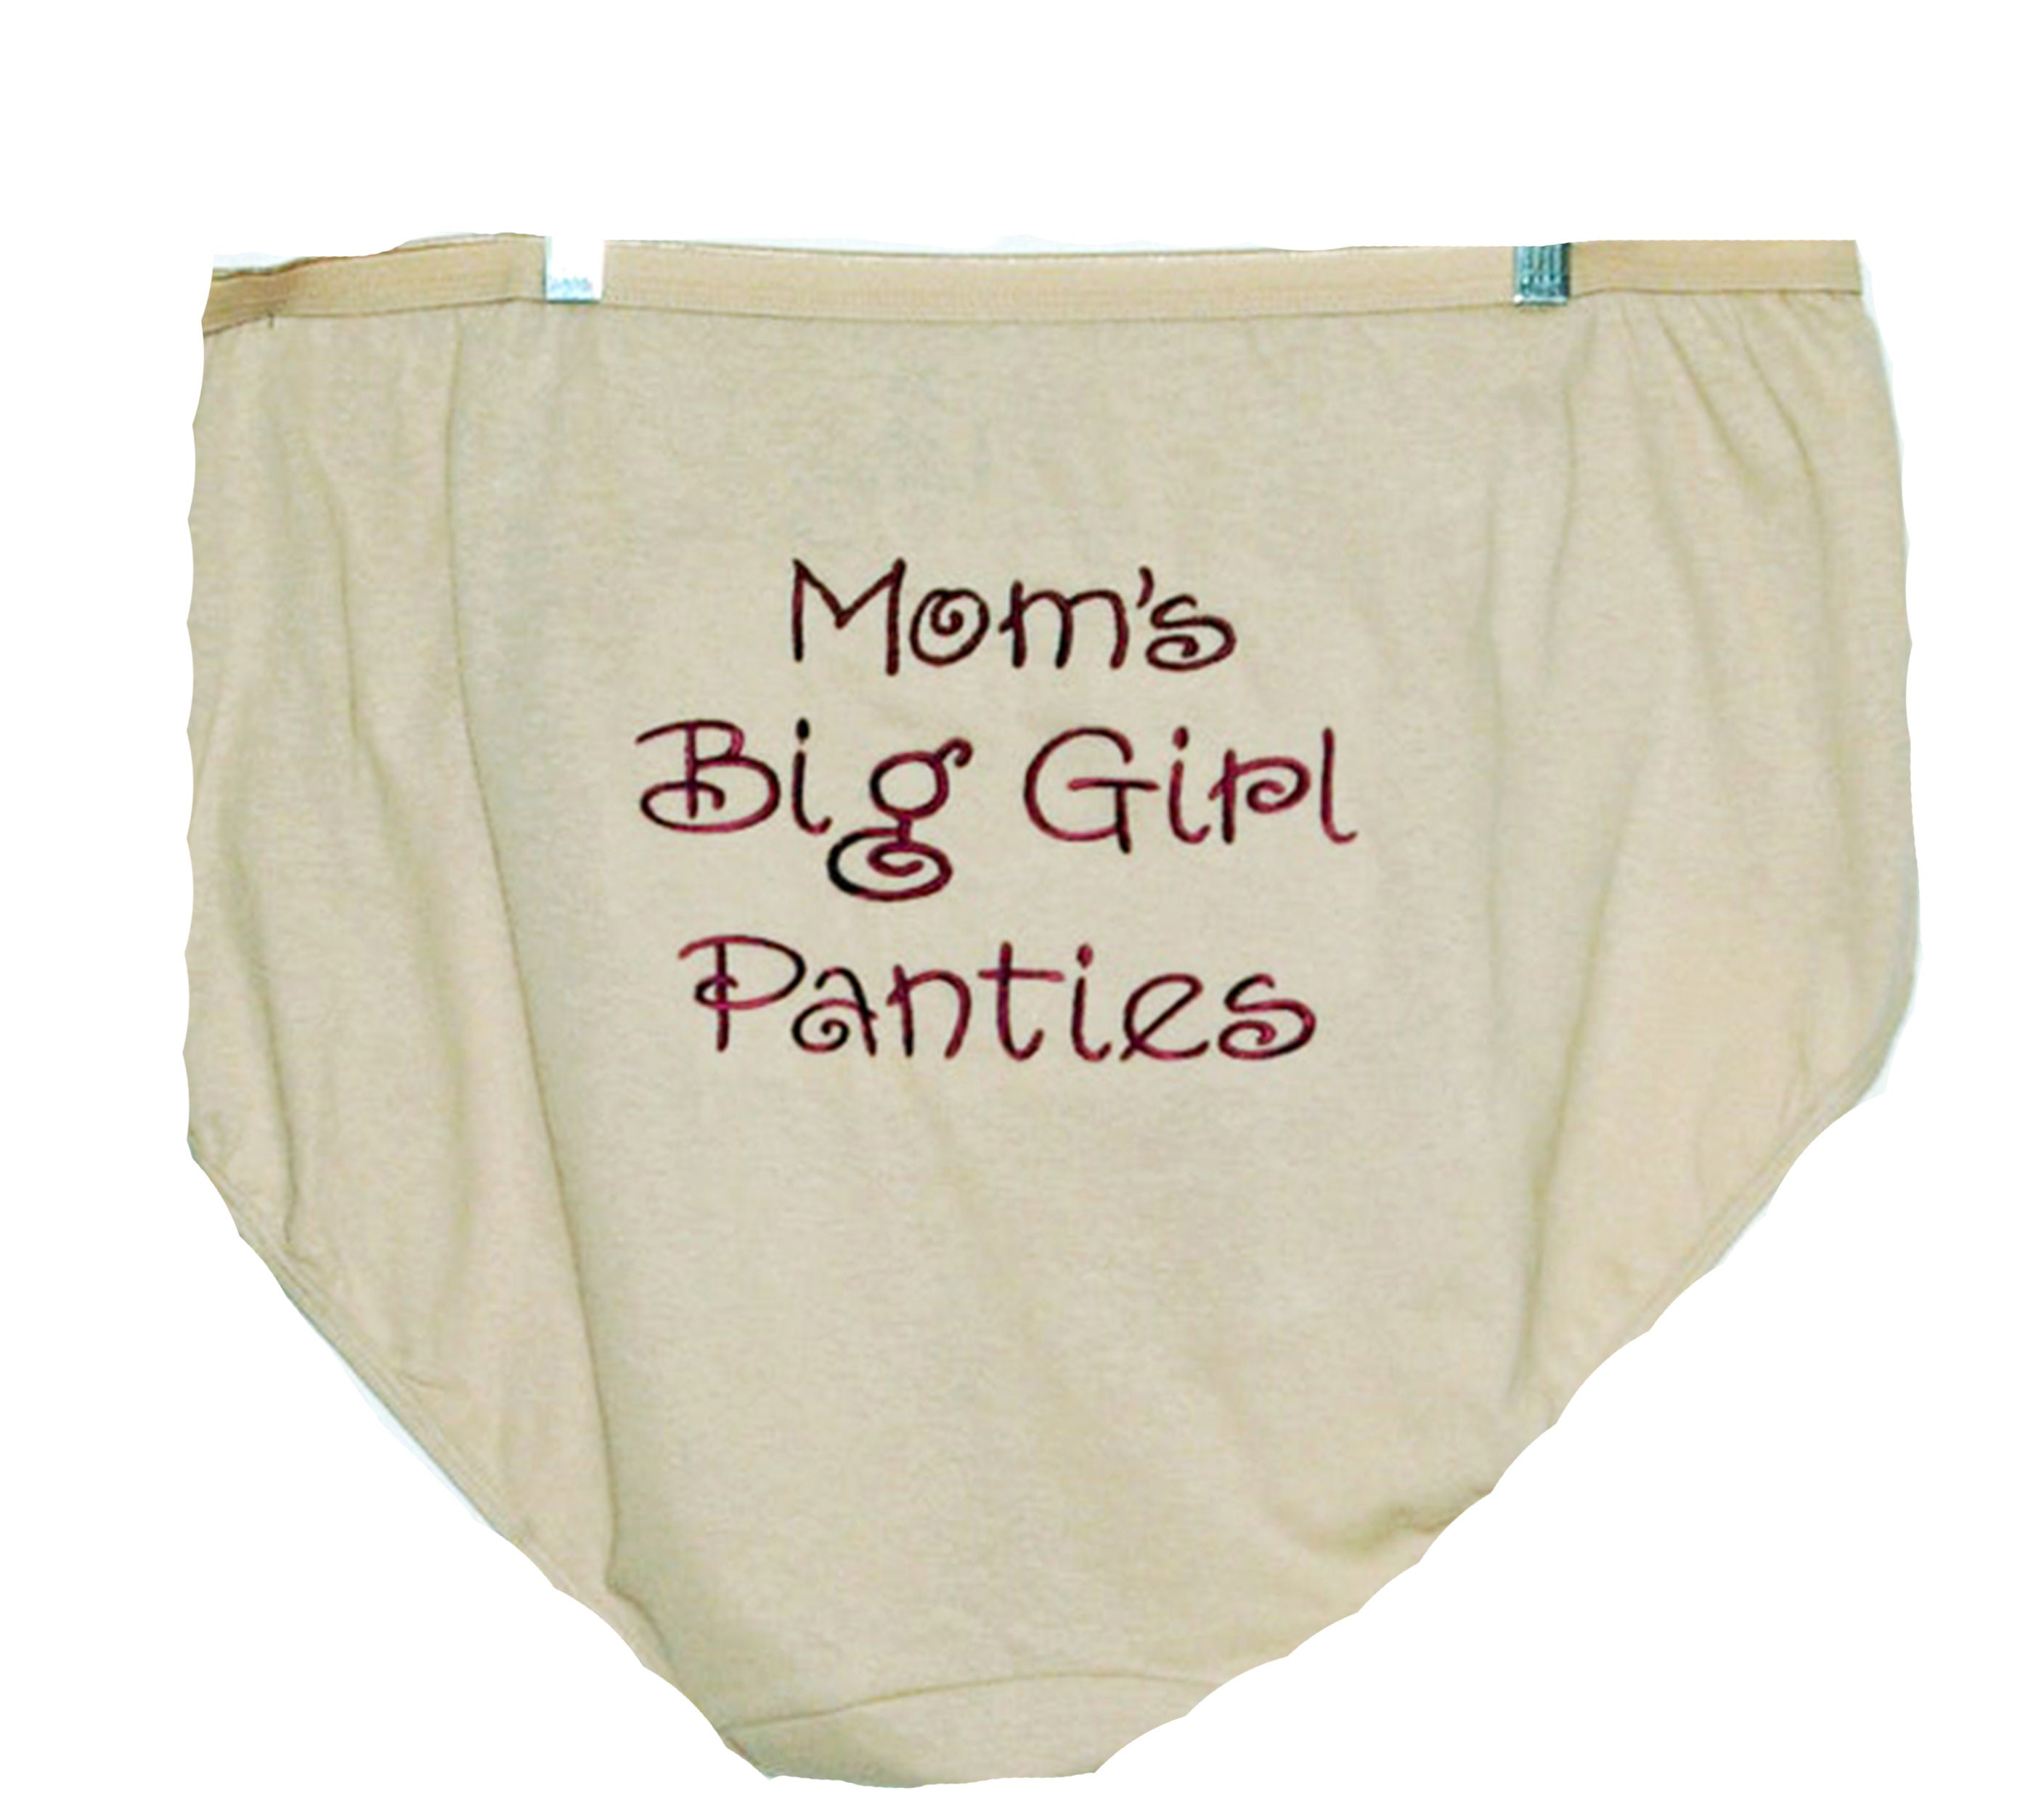 Review Revue: Cheap Old School Granny Panties (you know you love them) «  Manolo for the Big Girl